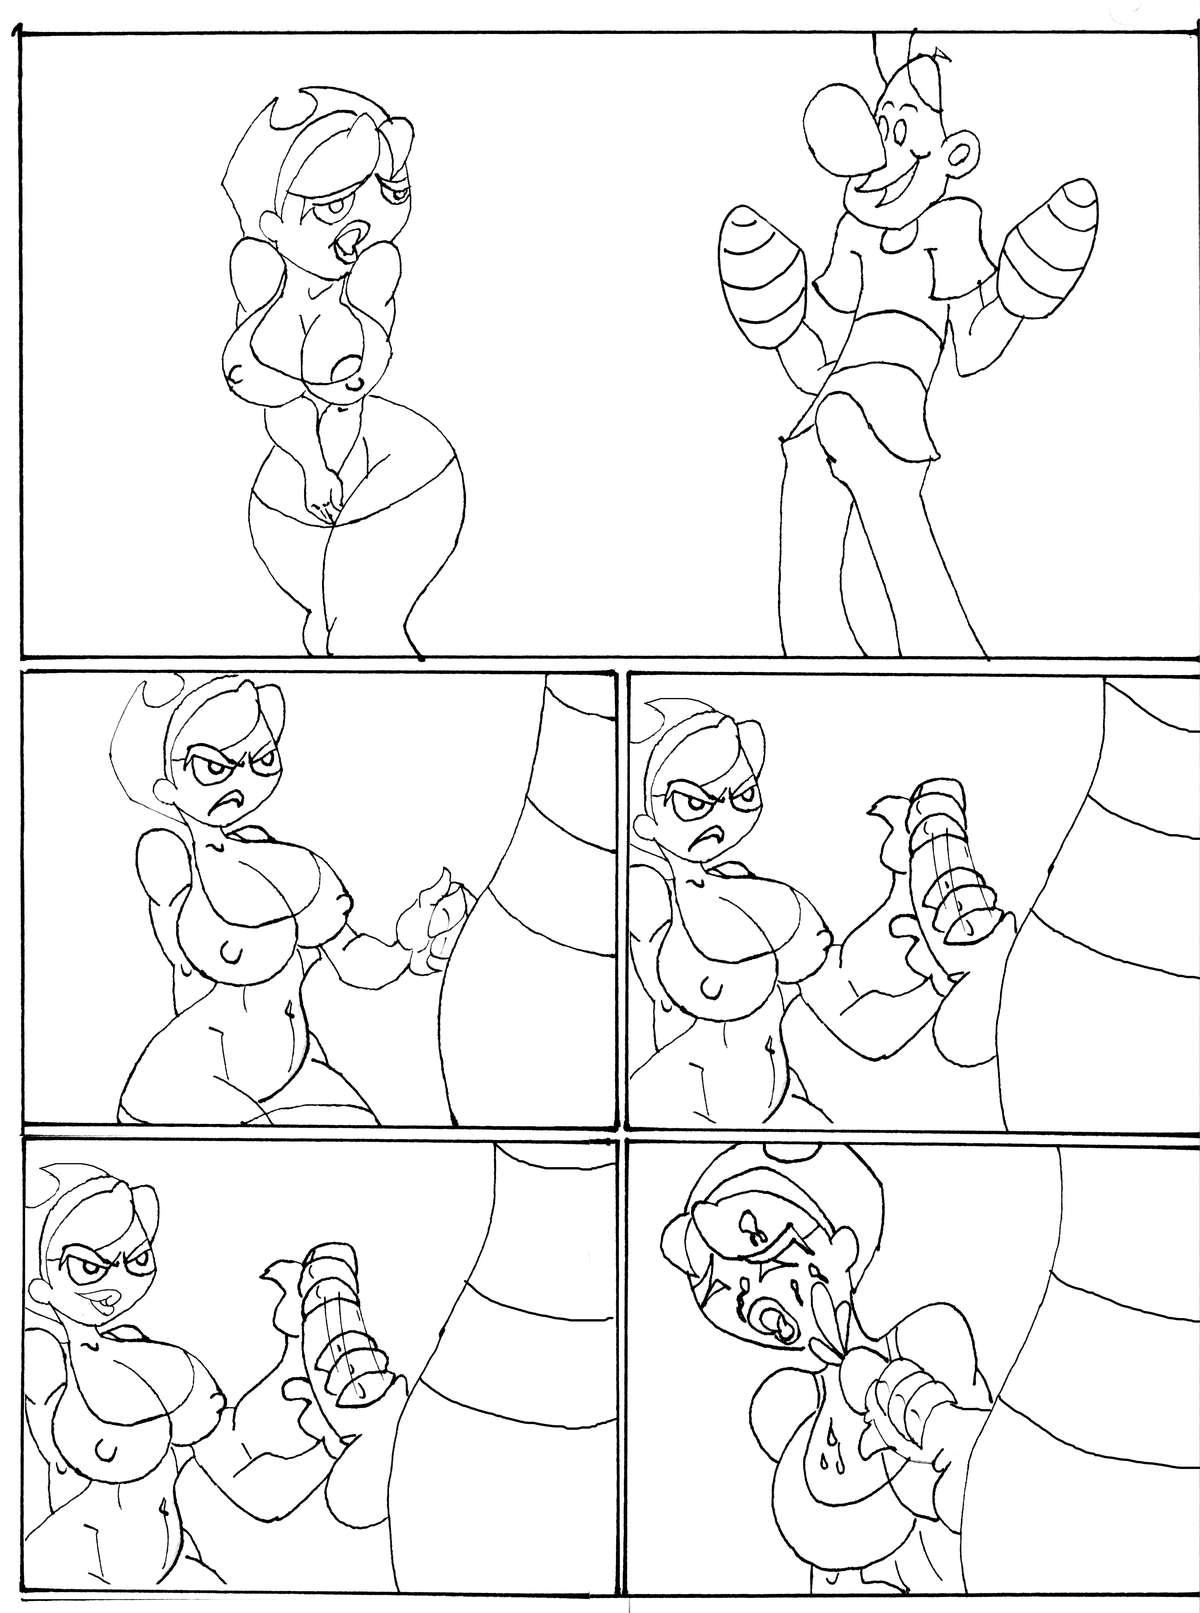 French billy y mandy - The grim adventures of billy and mandy Anus - Page 5